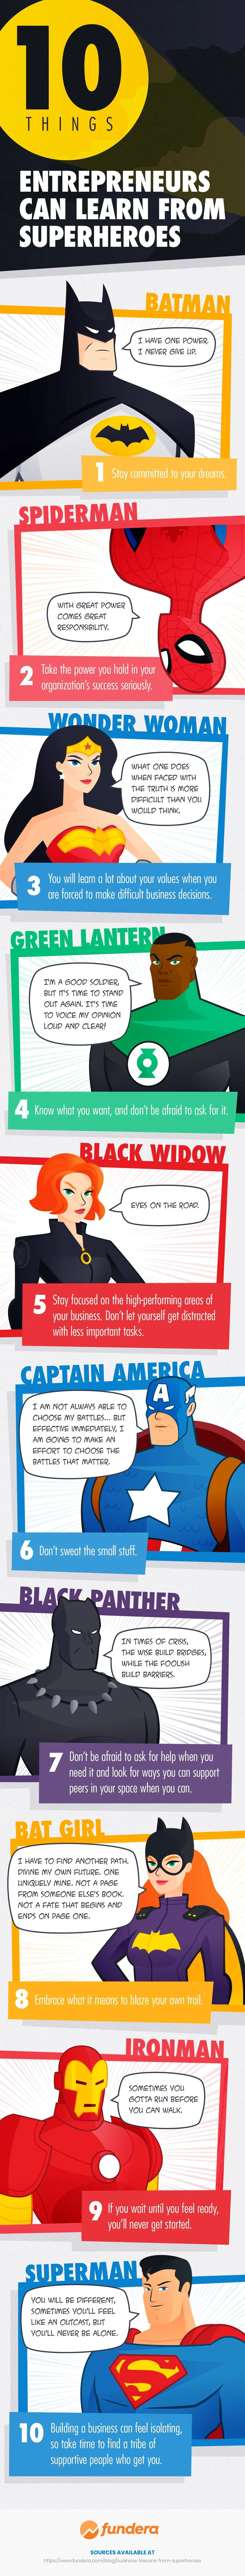 10 Things Entrepreneurs Can Learn From Superheroes -  #infographic